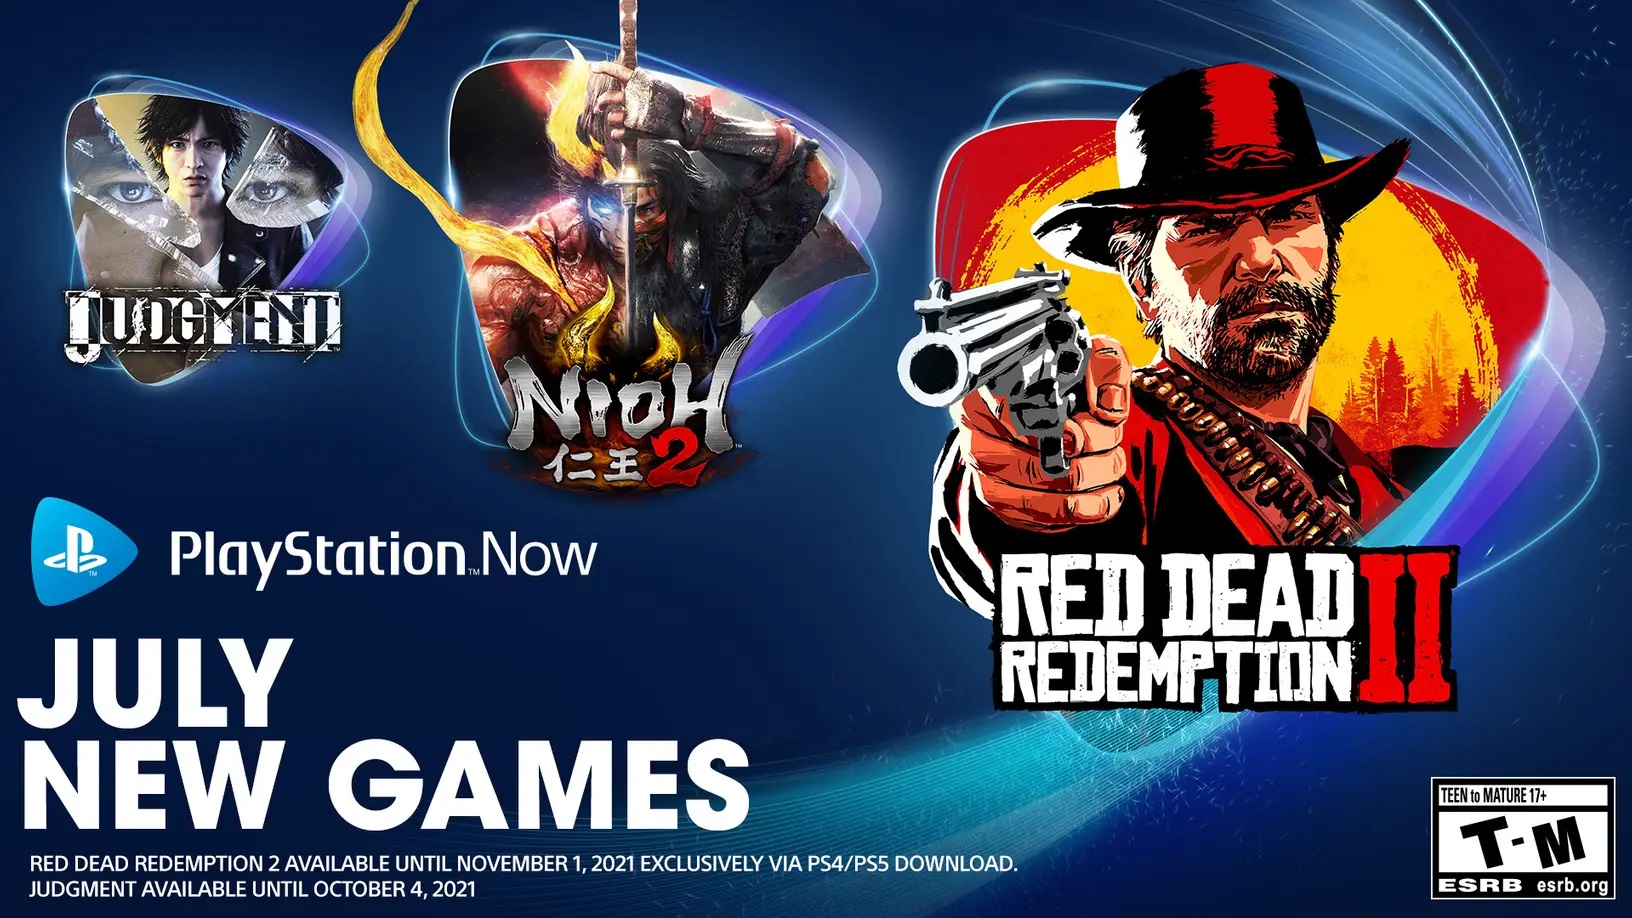 PlayStation Now Adds Red Dead Redemption 2, Nioh 2, God of War, Judgment, and More